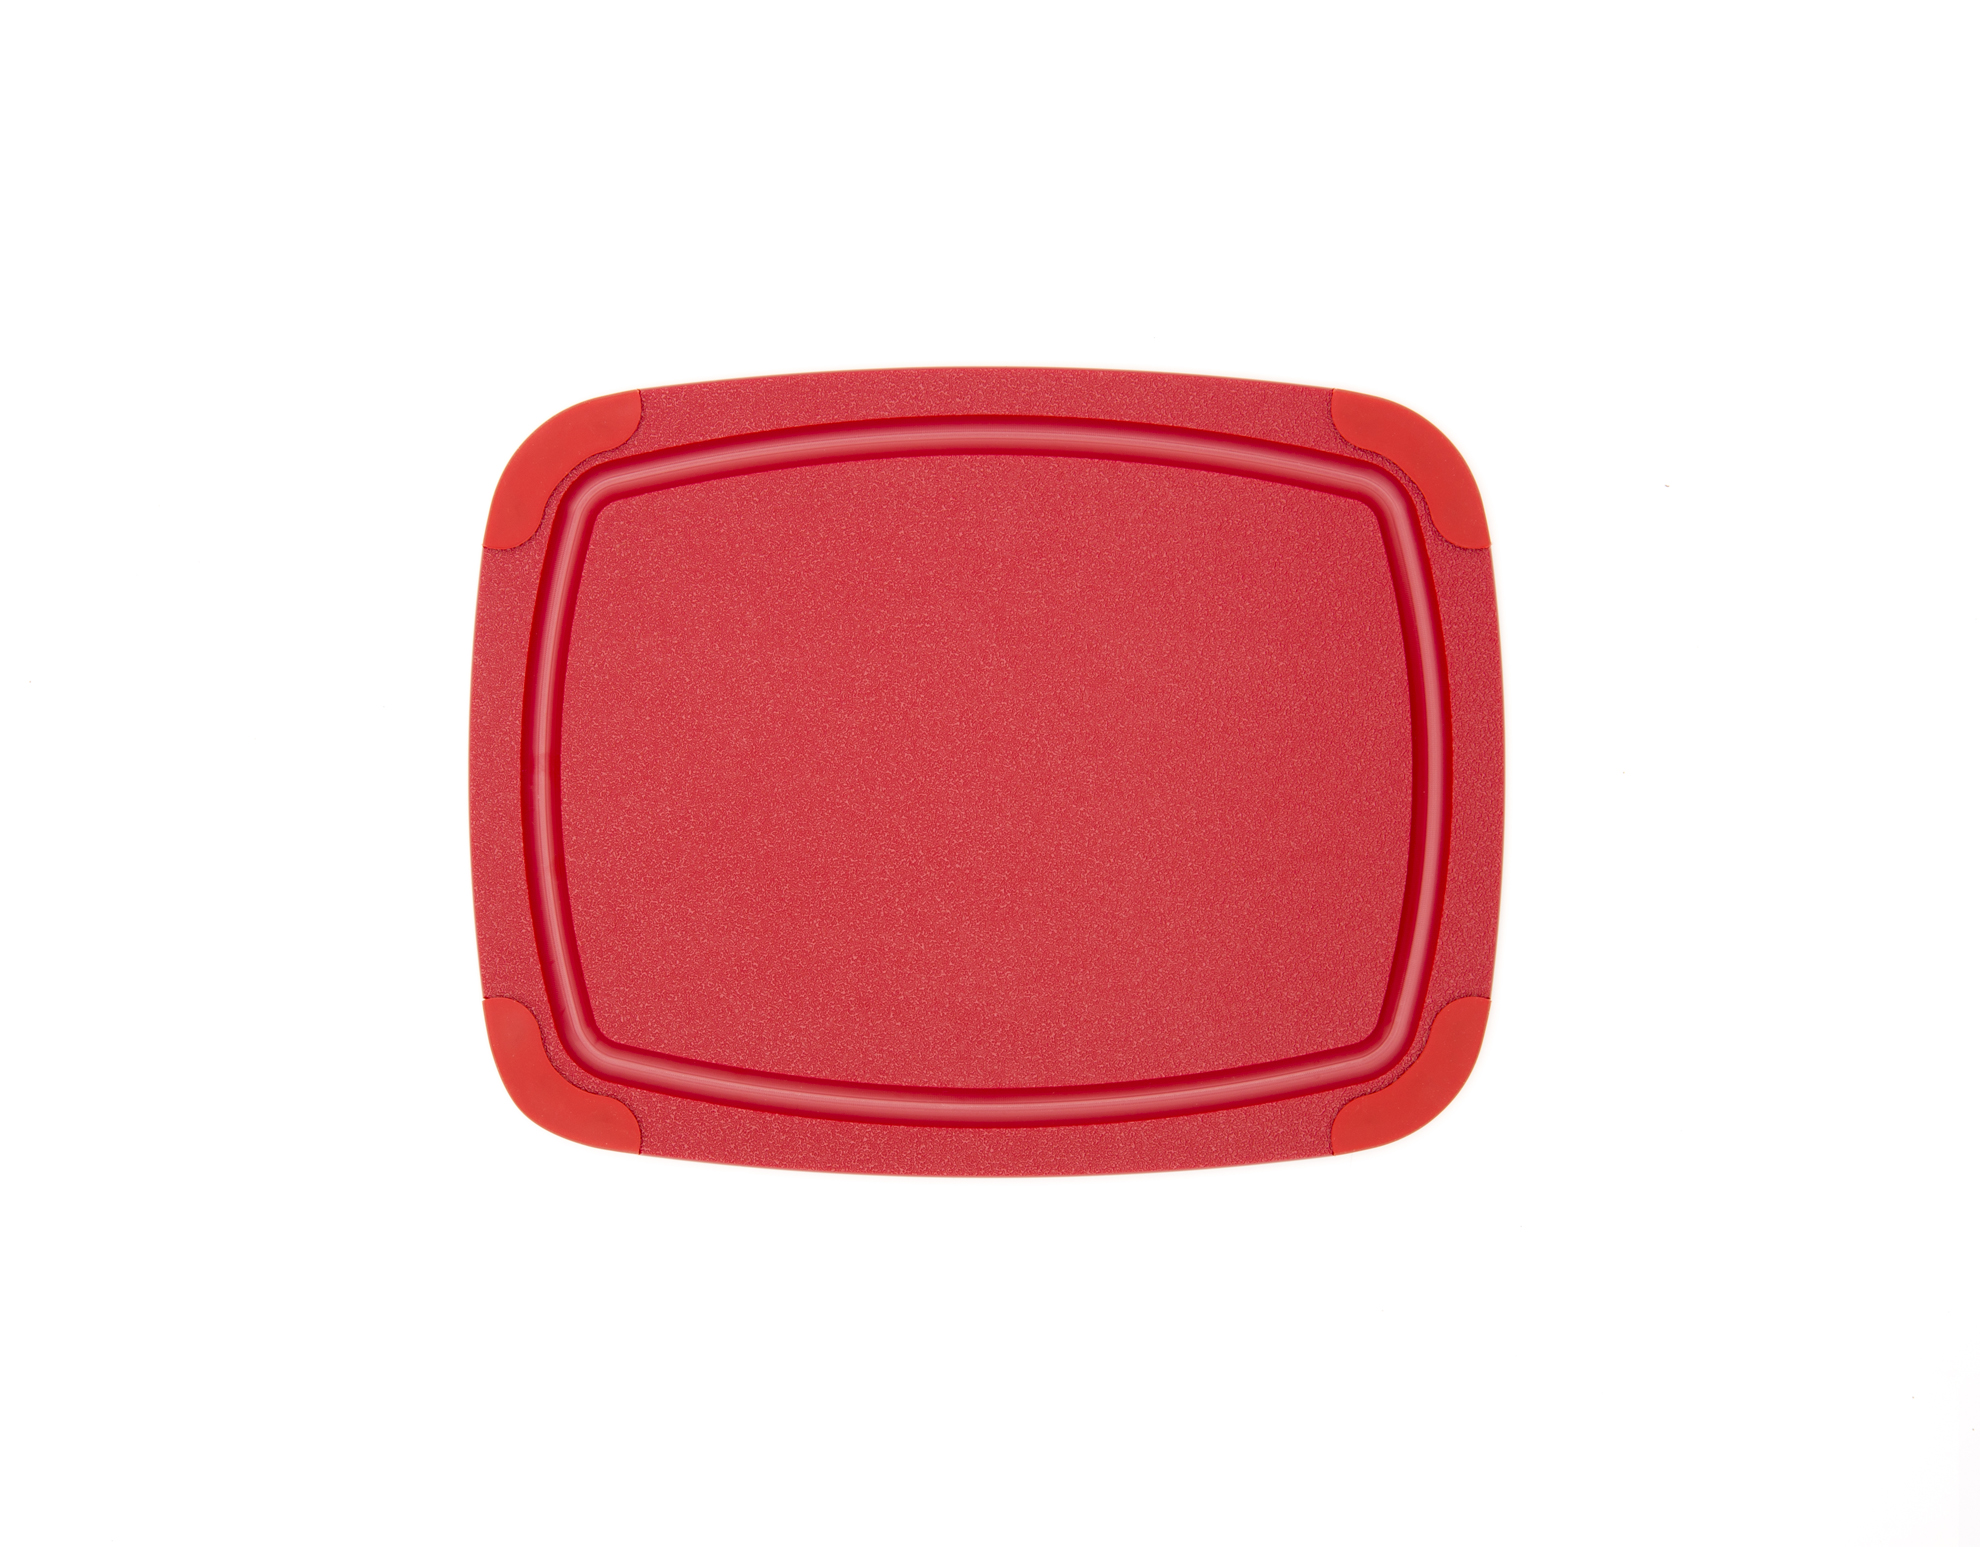 ecooks_MAIN-cutting board poly series-red-12×9-402120901